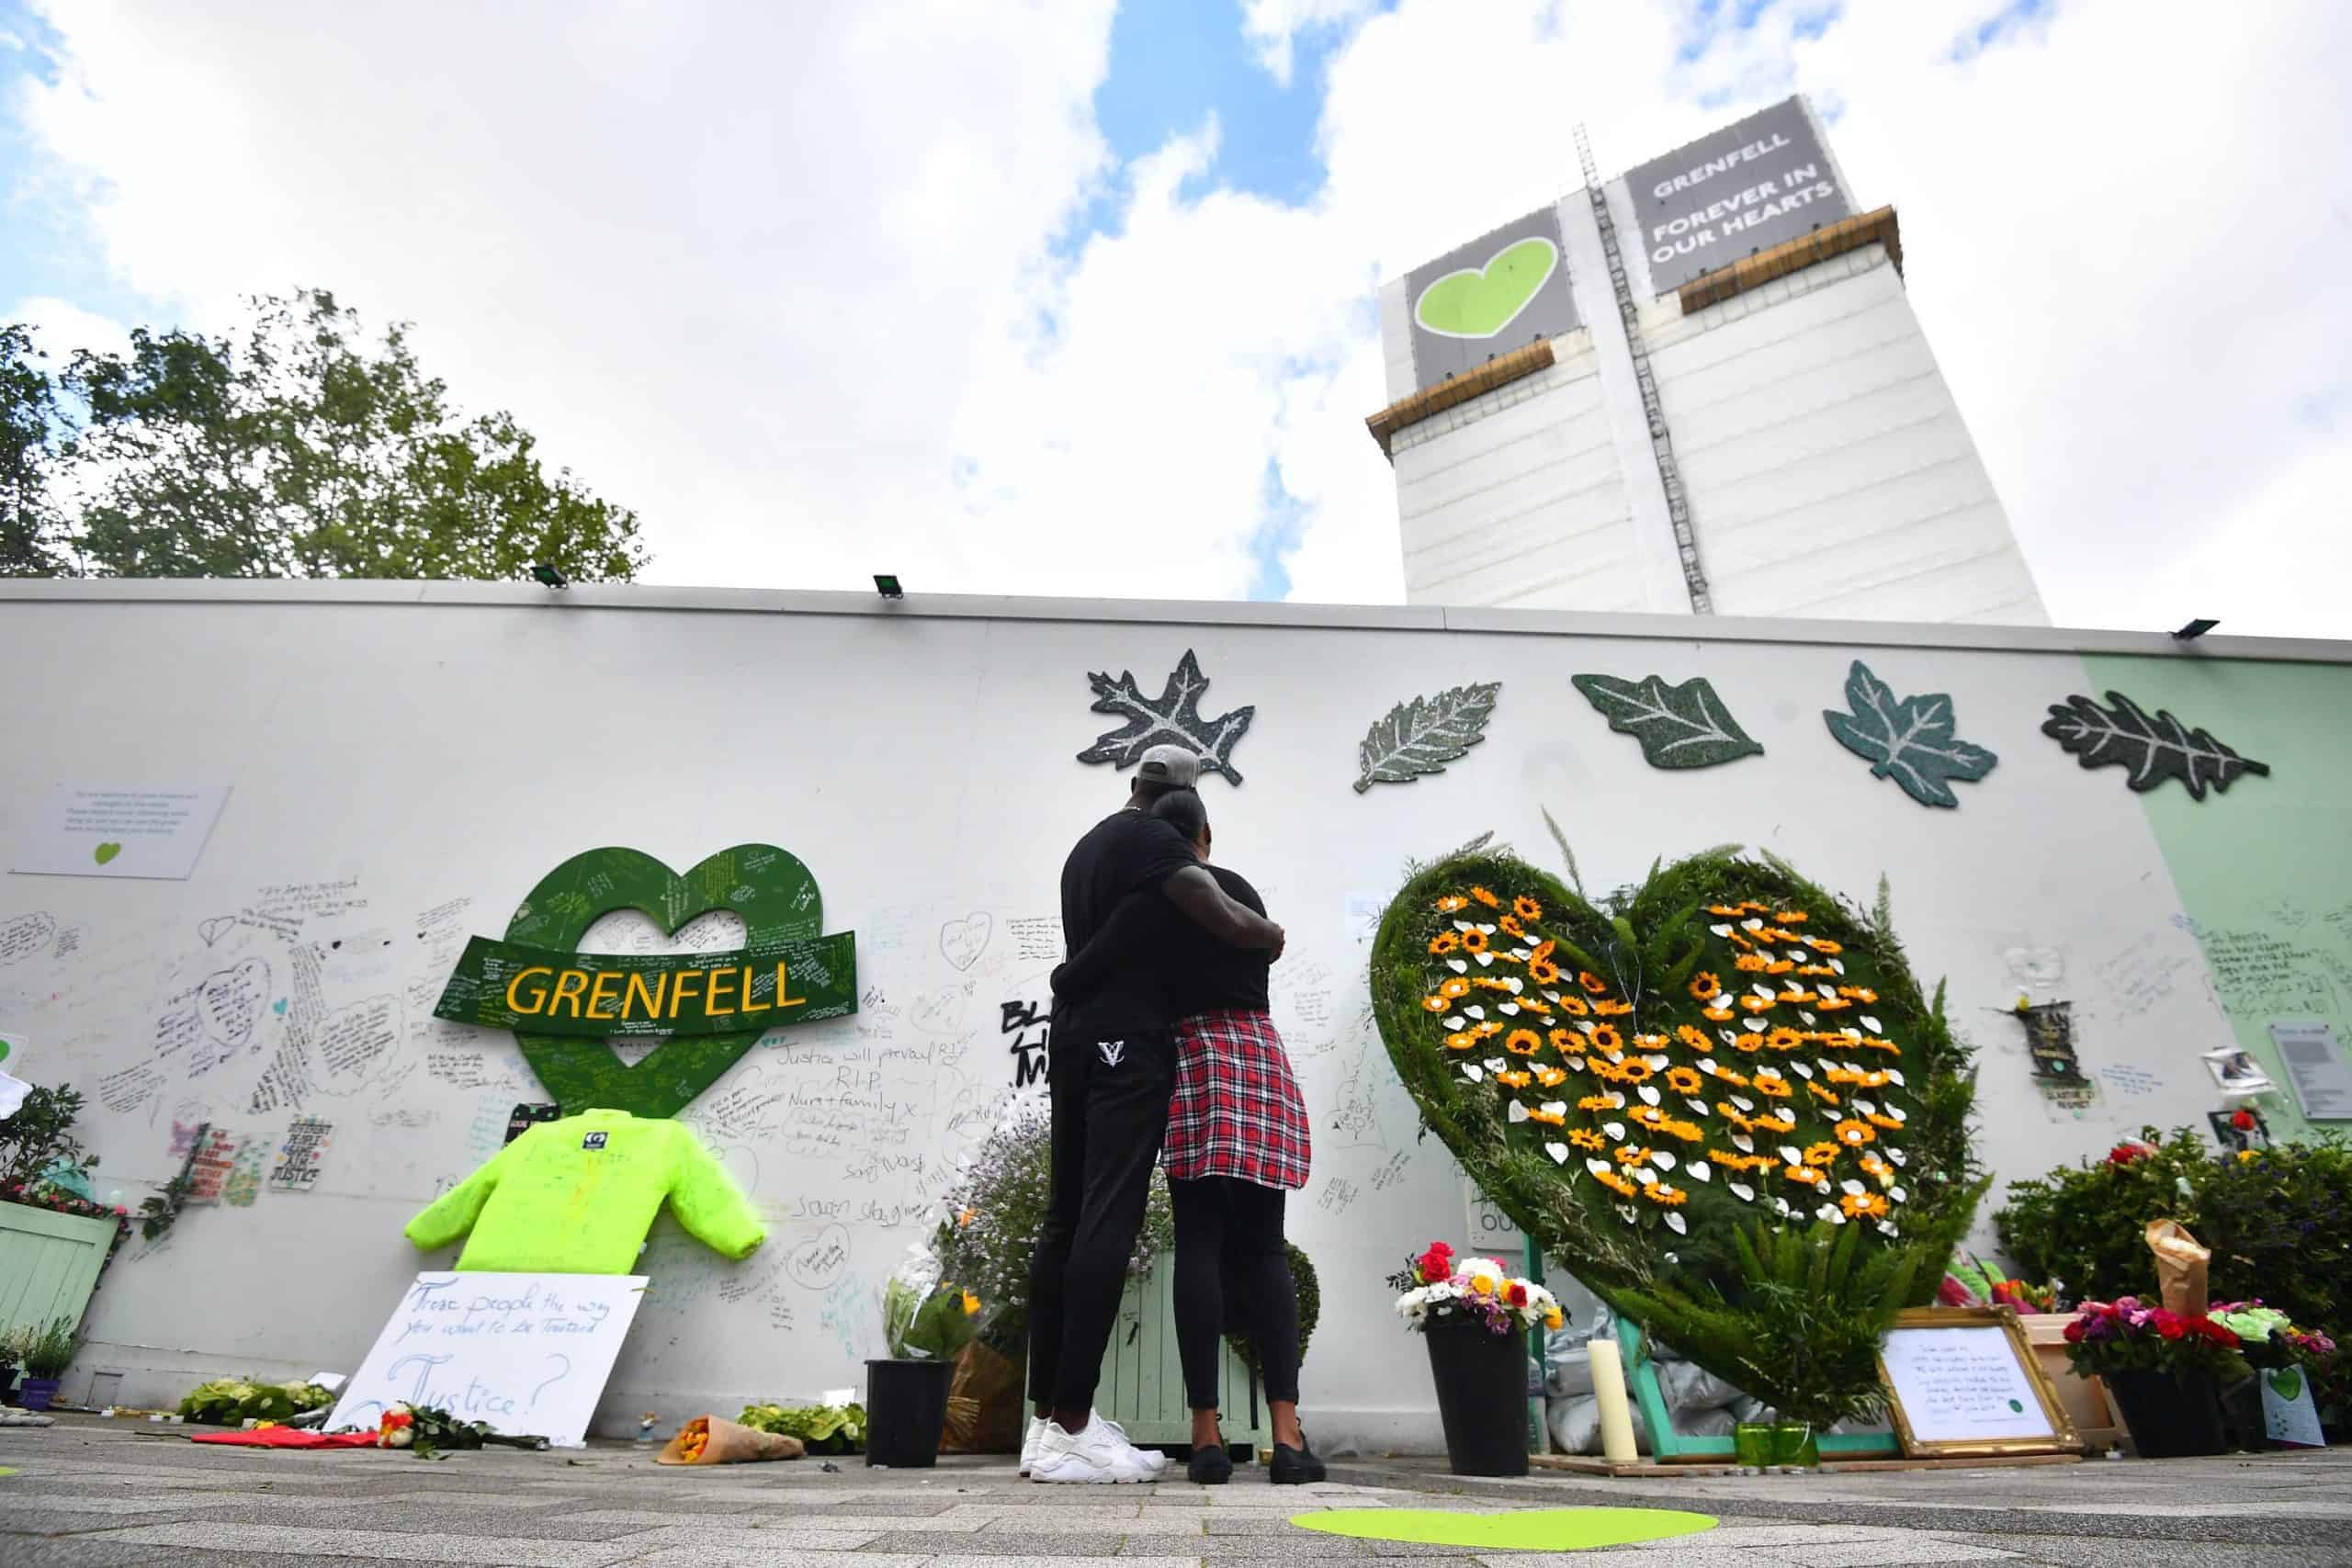 Grenfell victims say their MP has “abandoned” them after voting down amendment